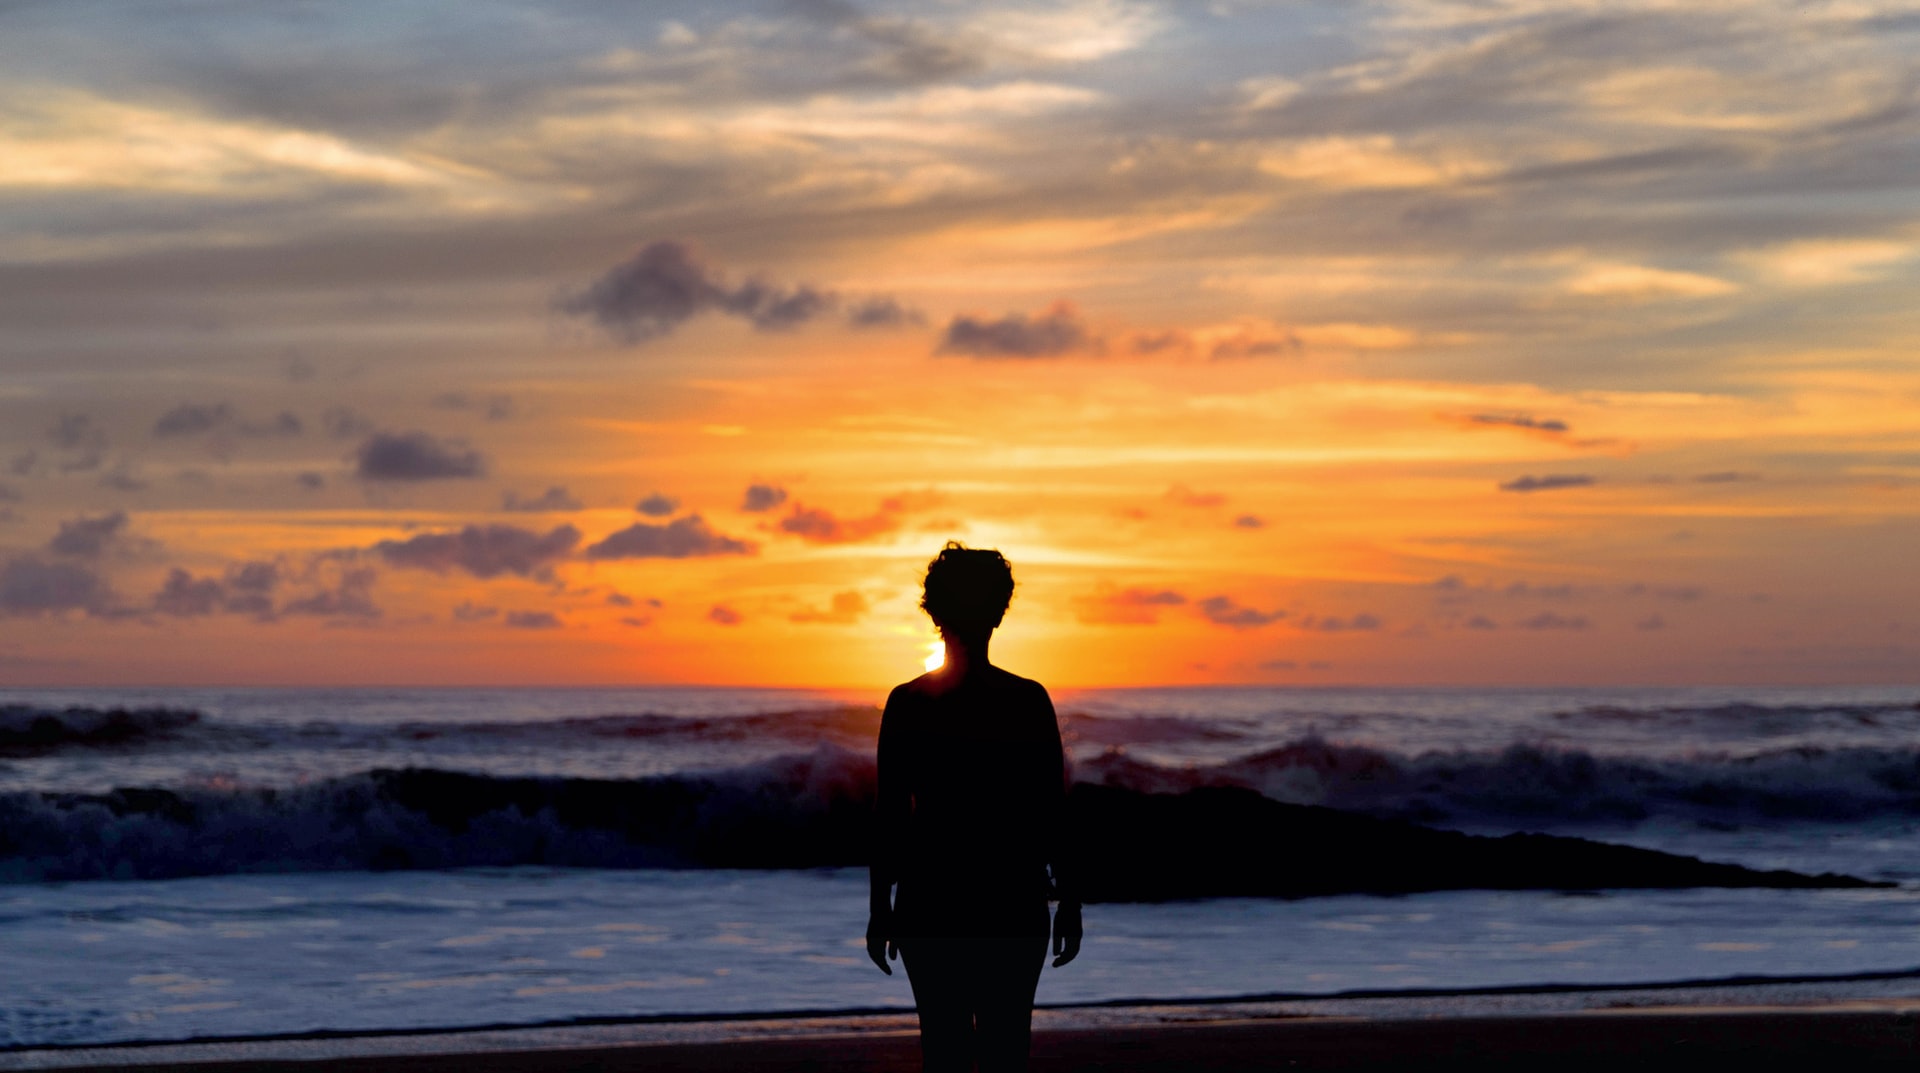 Person standing on the beach in Santa Teresa, Costa Rica at sunset